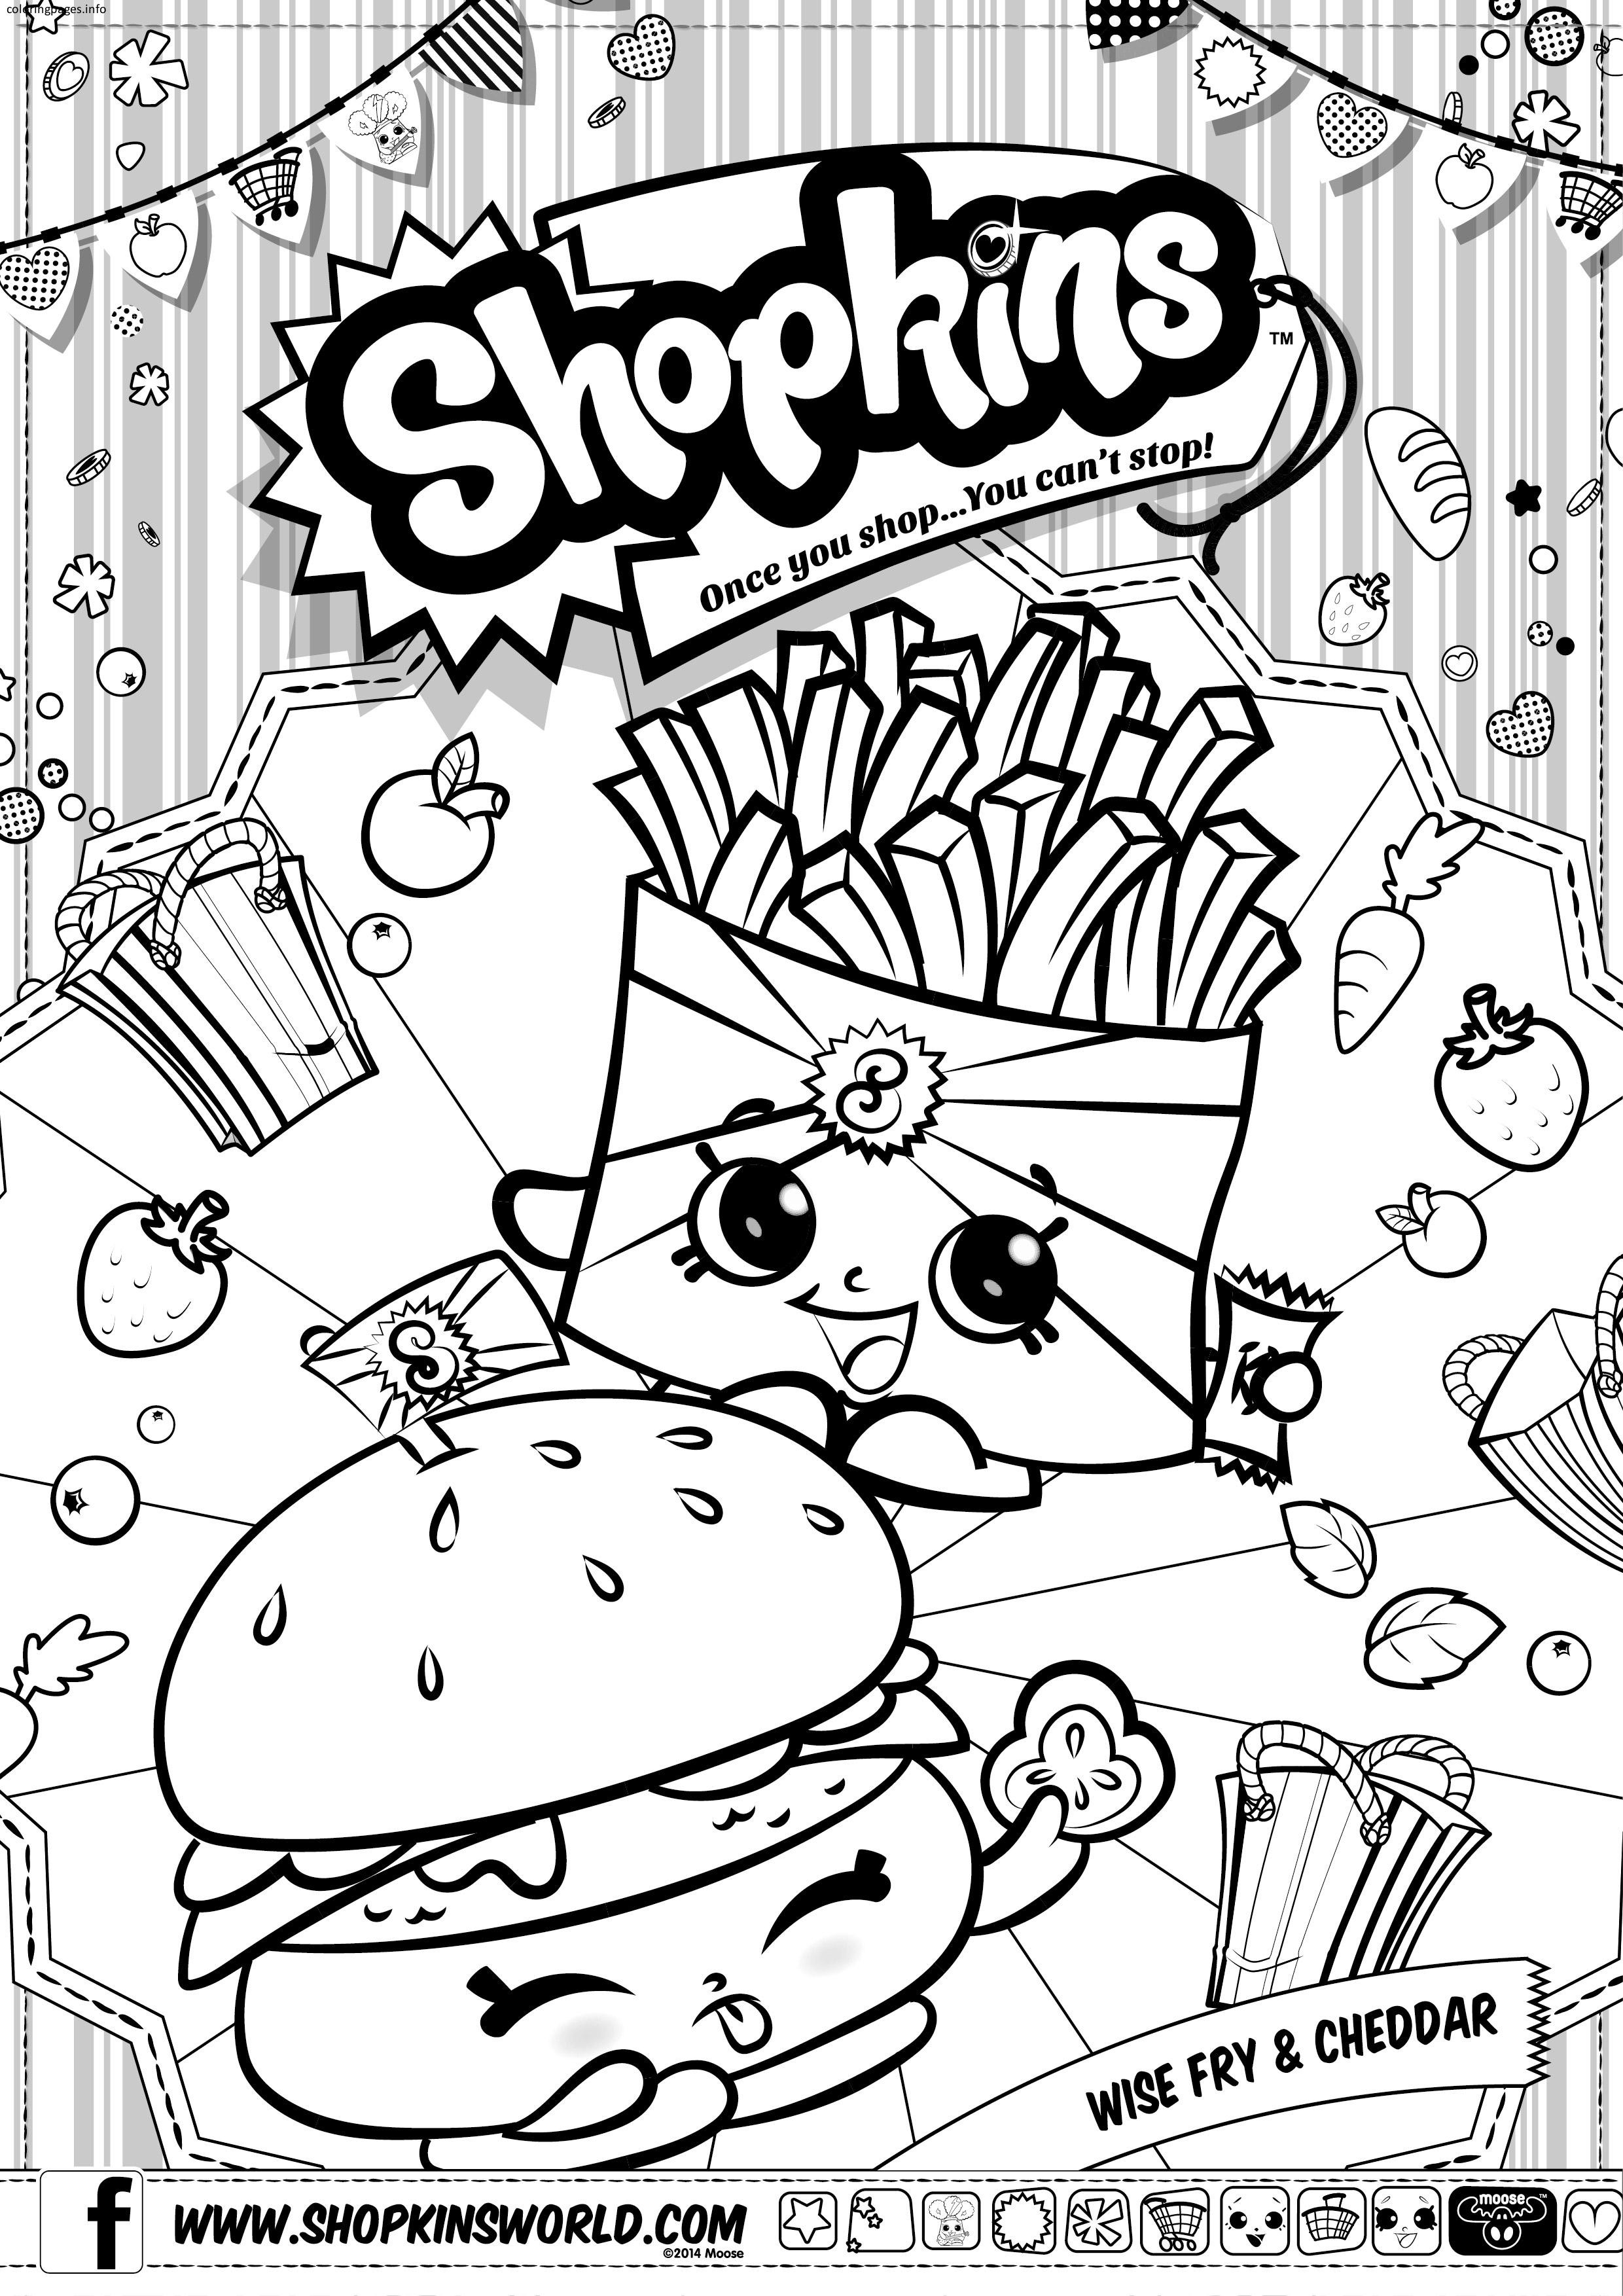 Shopkins World Coloring Pages at GetColorings.com | Free printable